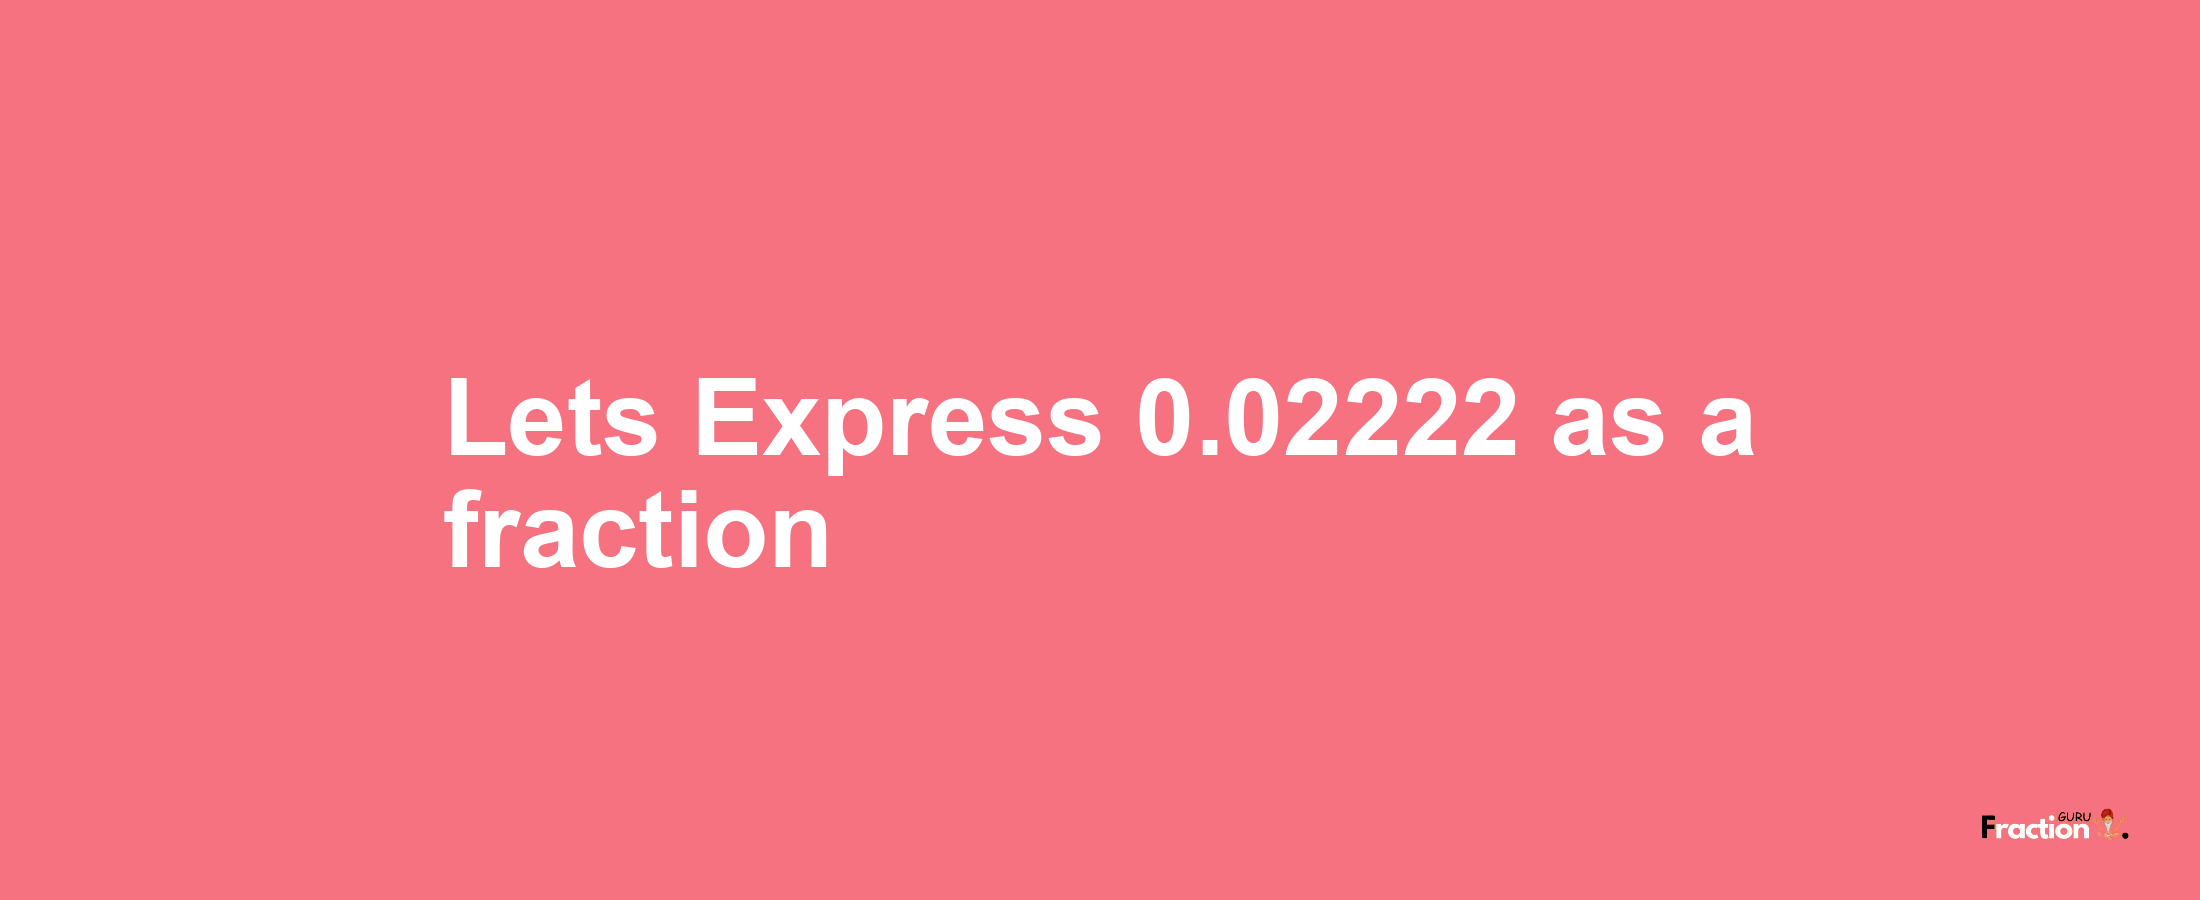 Lets Express 0.02222 as afraction